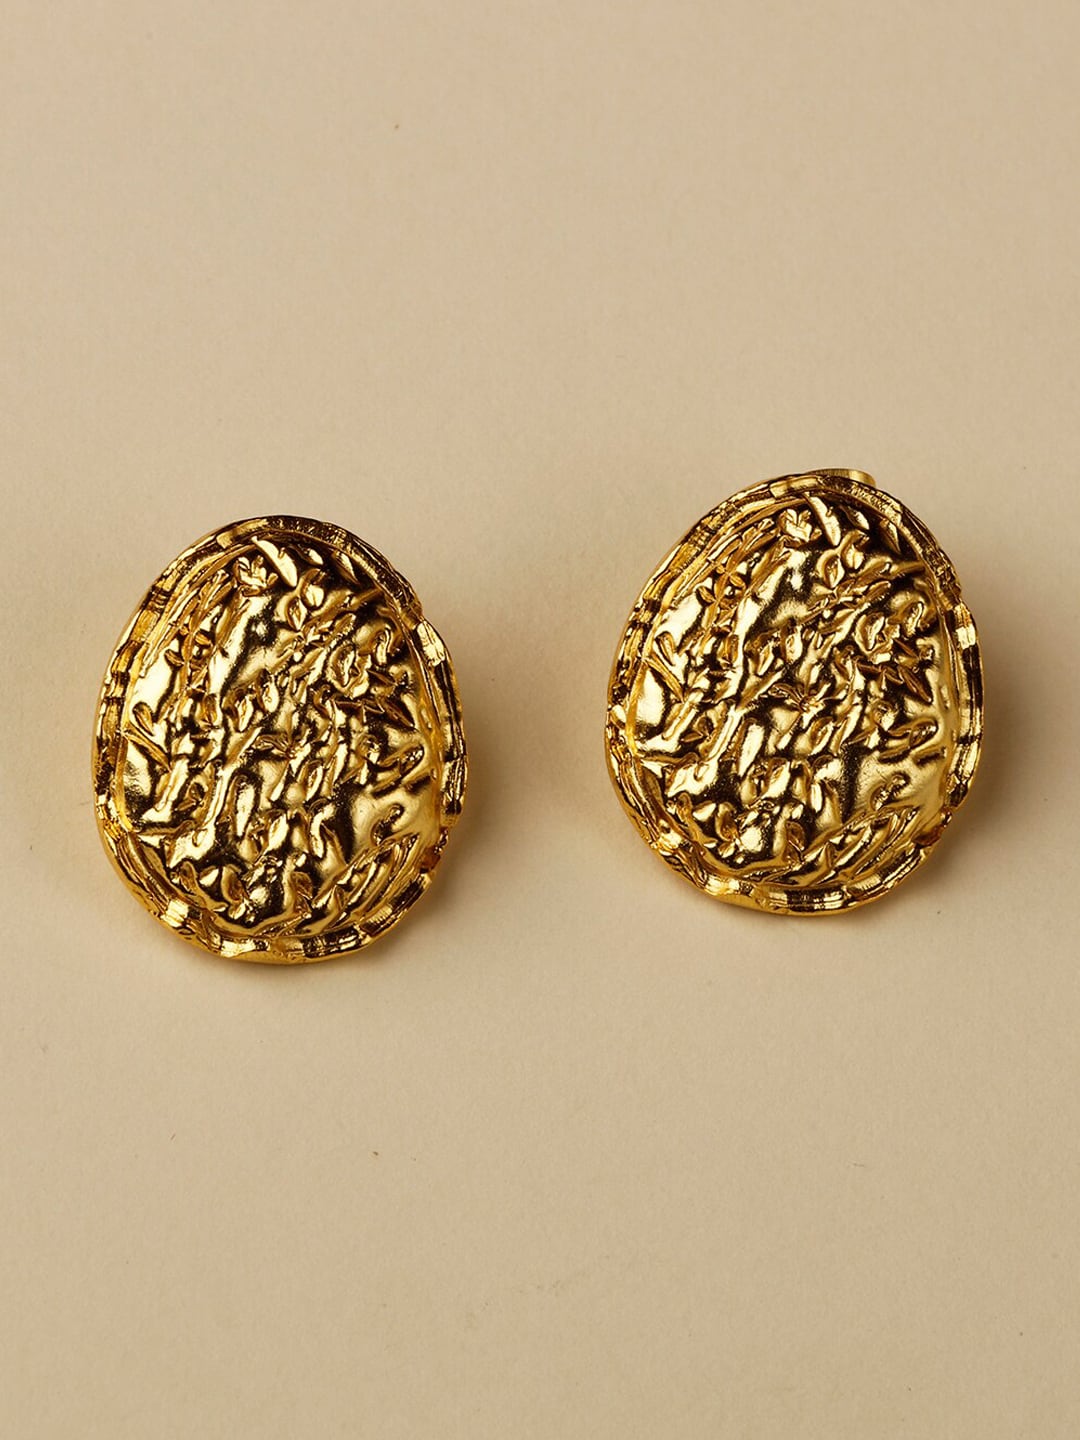 STILSKII Gold-Toned Contemporary Studs Earrings Price in India